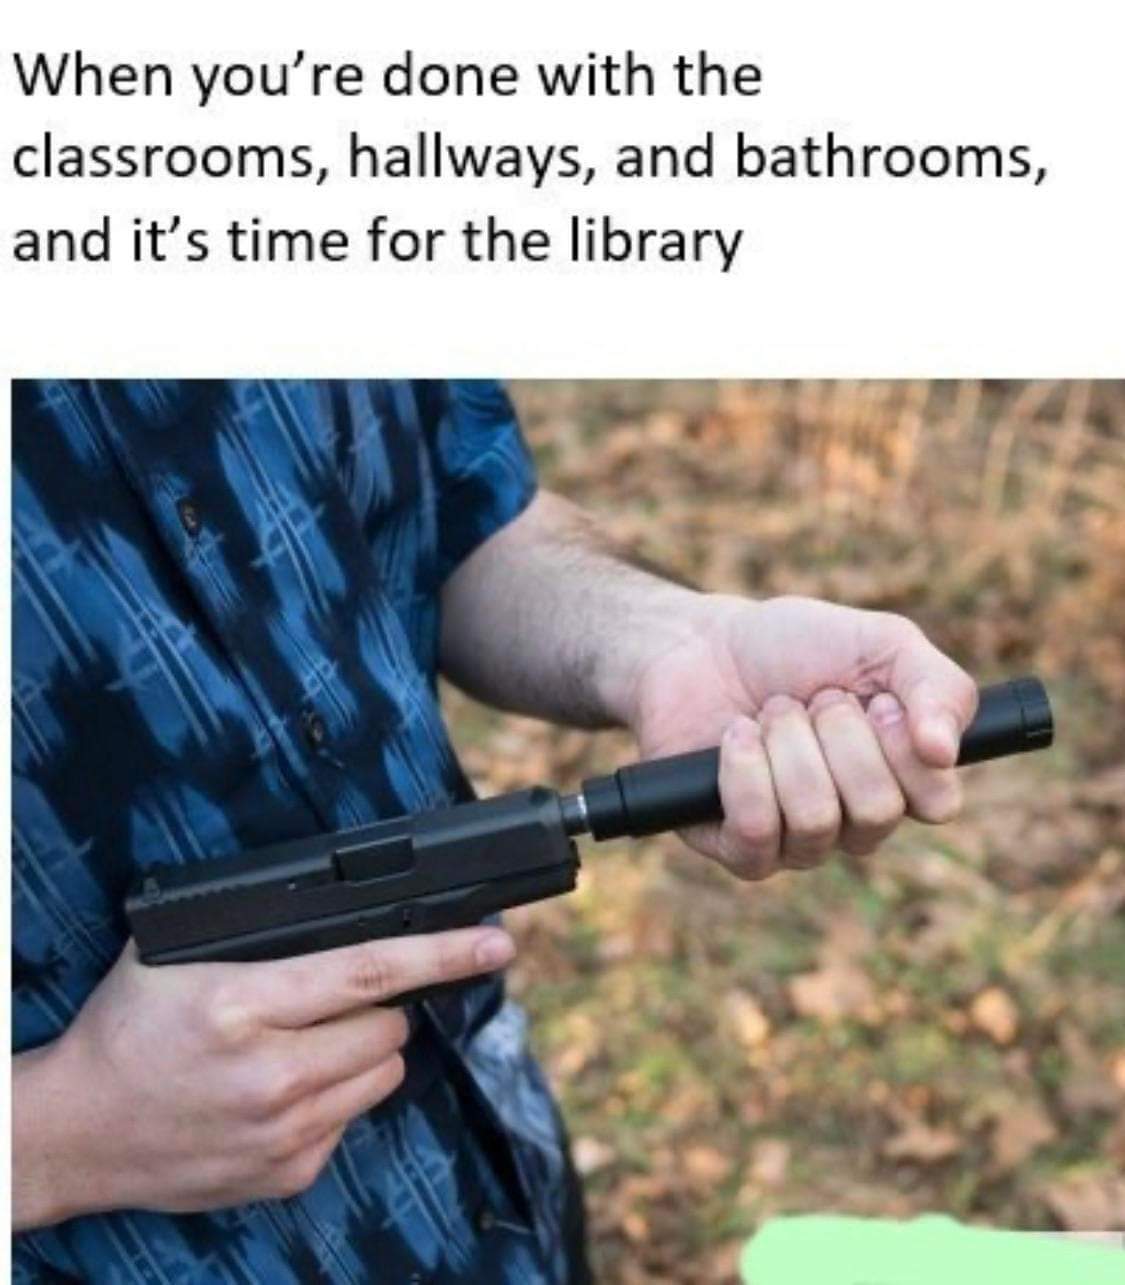 school shooter autistic meme - When you're done with the classrooms, hallways, and bathrooms, and it's time for the library